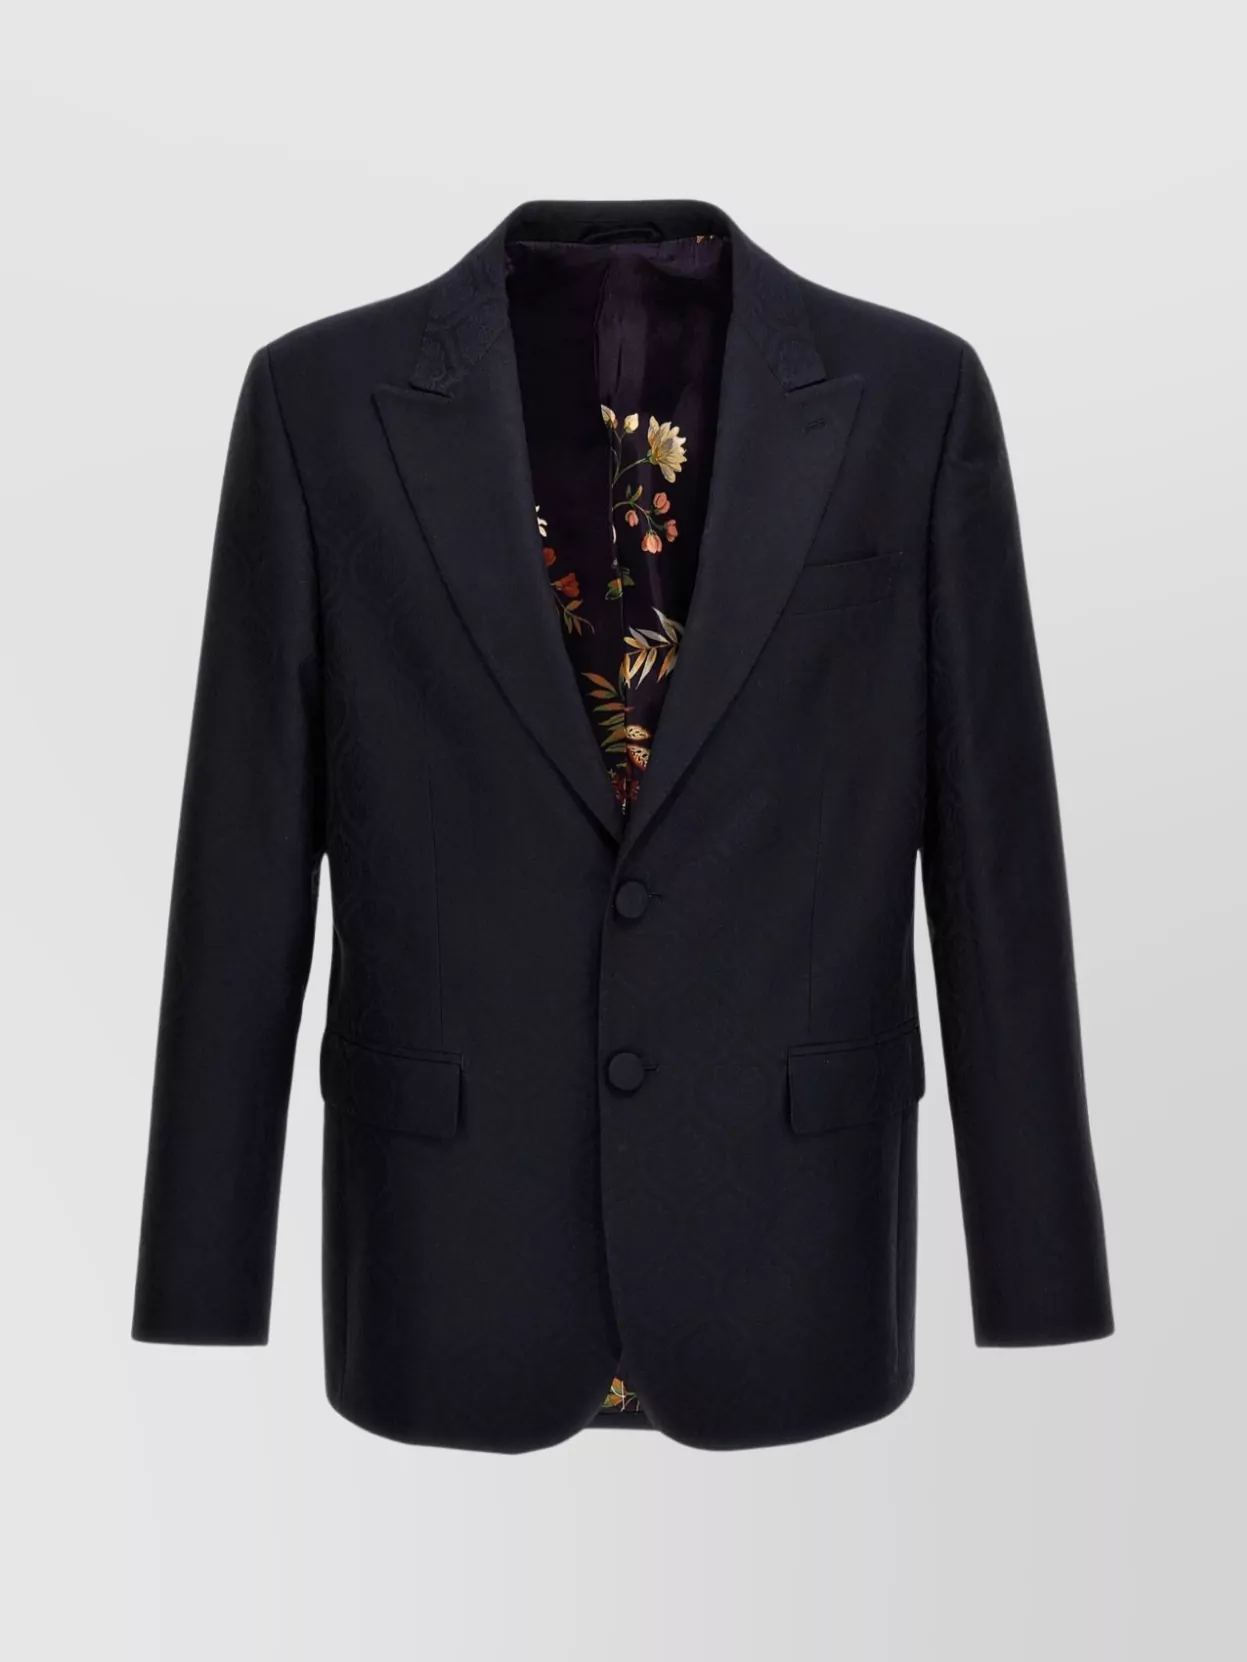 Etro Jacquard Blazer With Single-breasted Design In Blue